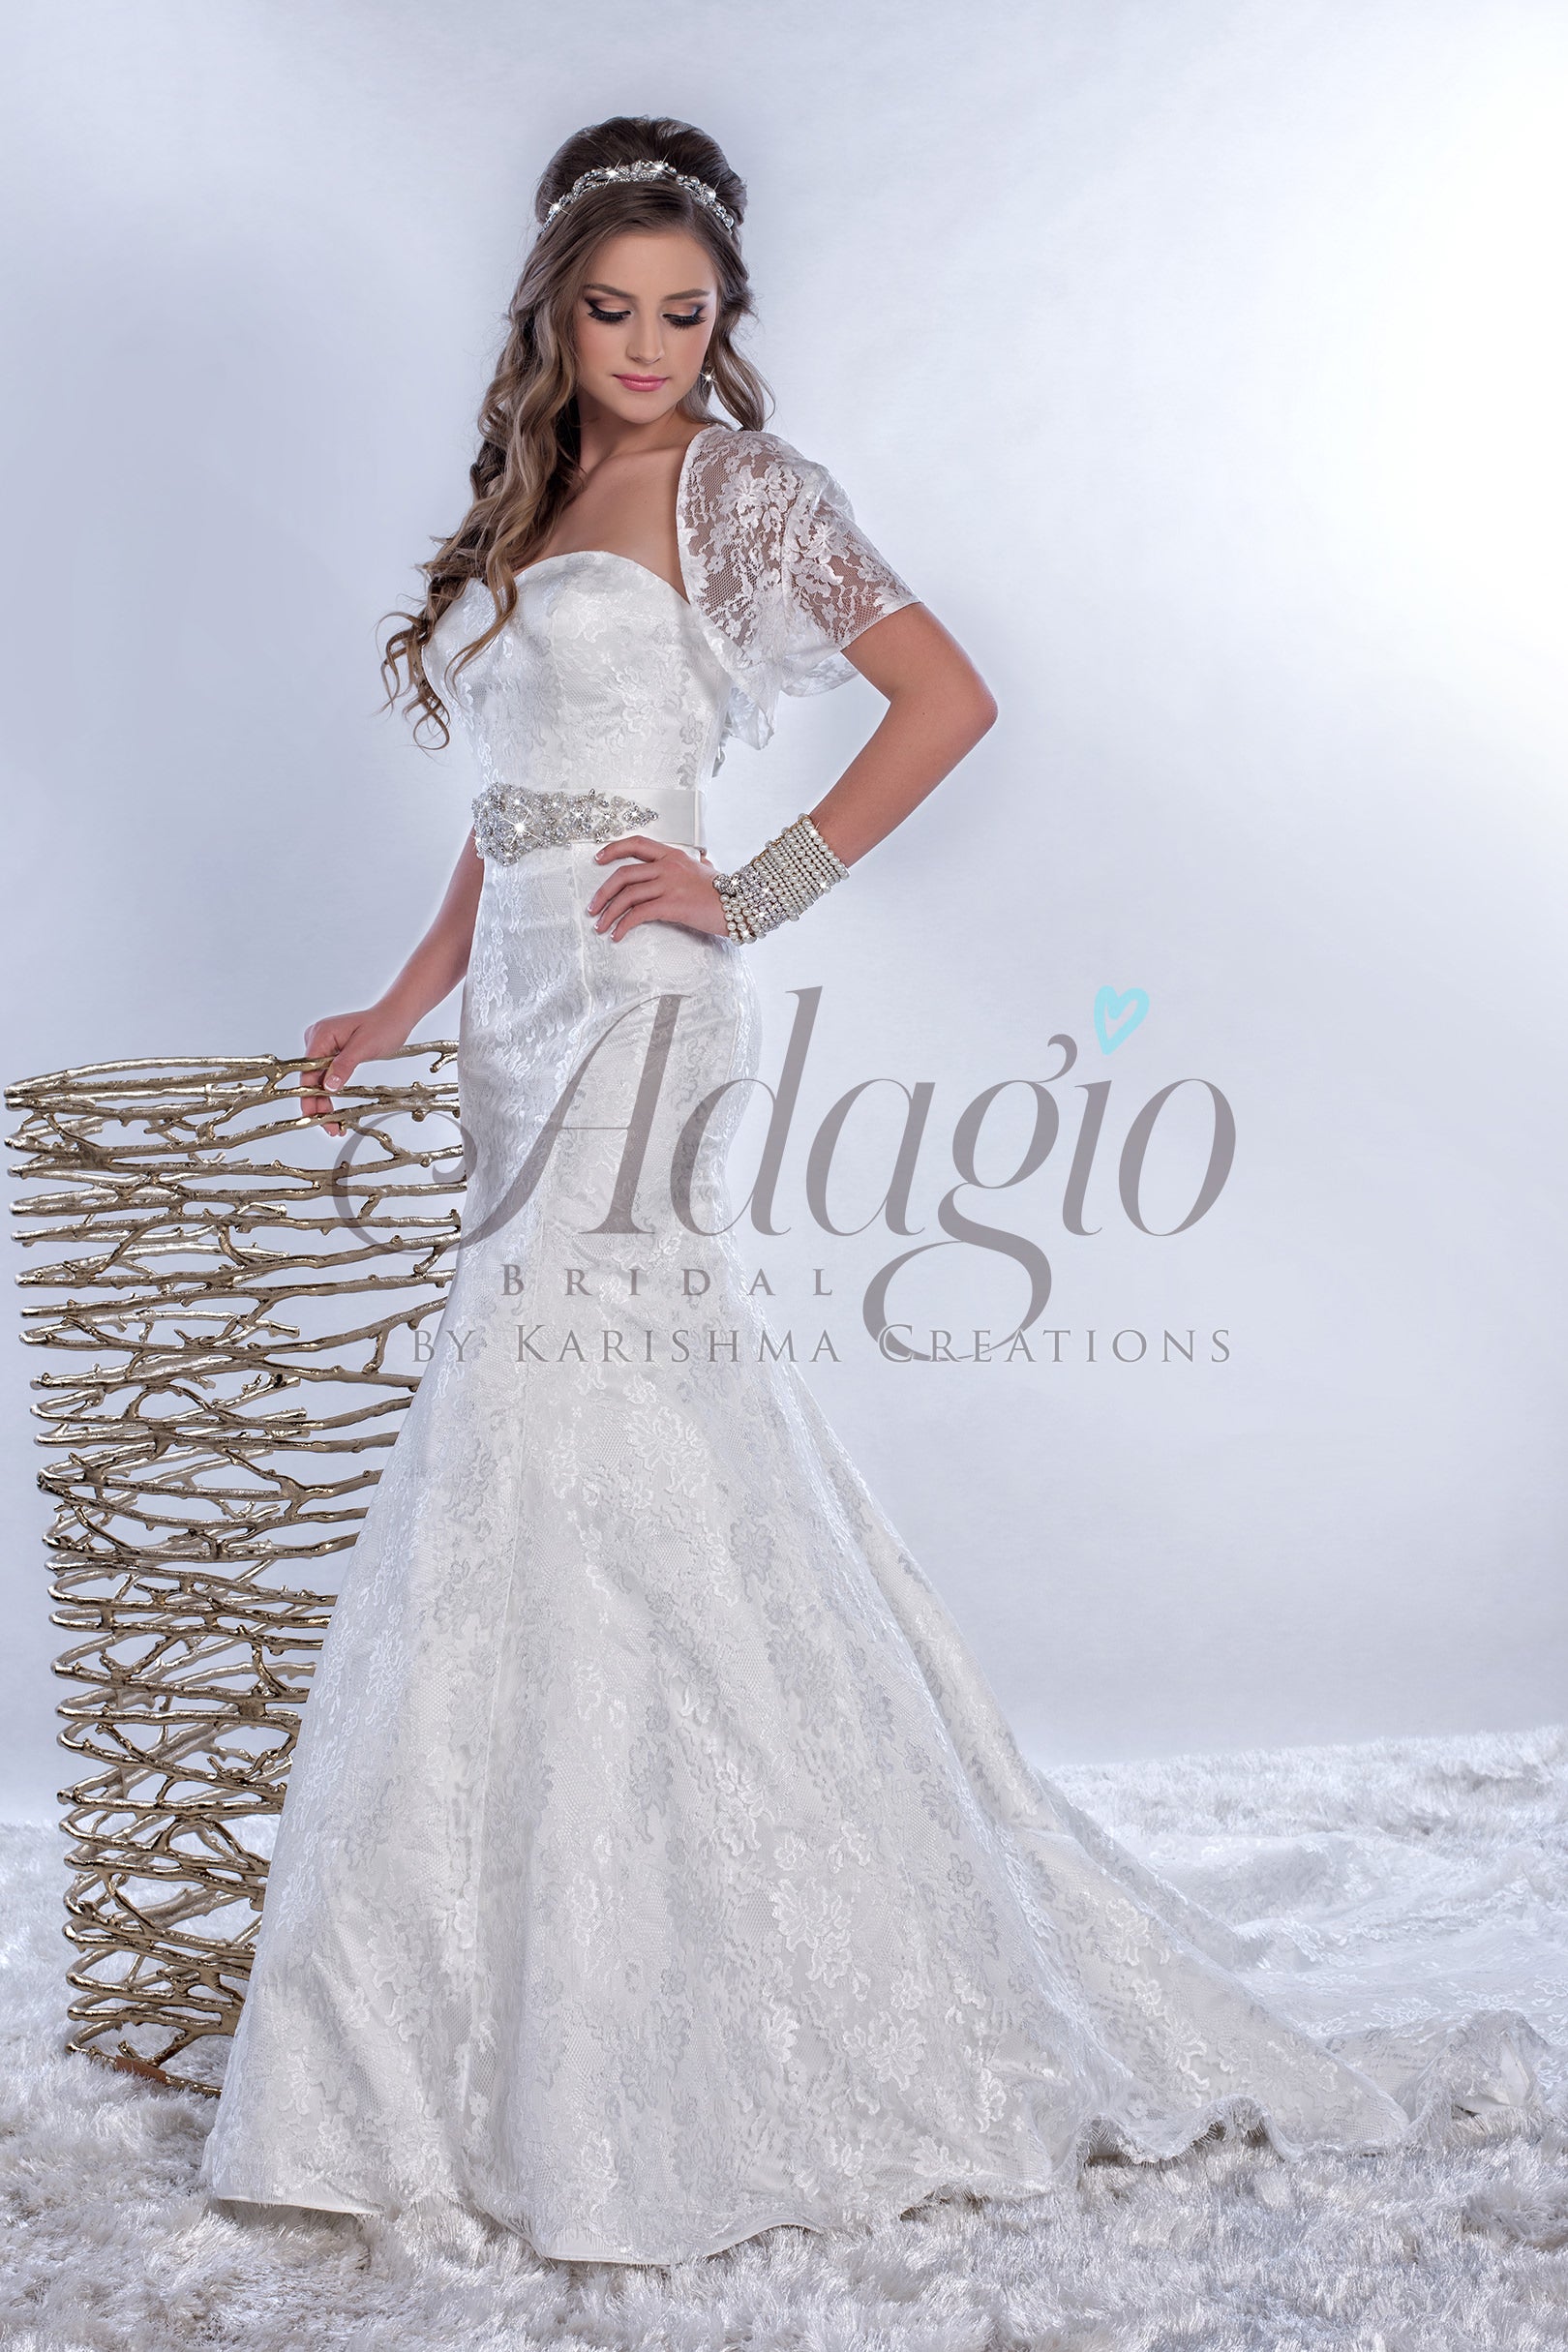 Adagio Bridal W9149 strapless sweetheart neckline long fit and flare lace wedding dress bridal gown with bolero jacket and crystal belt attached to waist with a train category wedding dresses bridal gowns destination bridal gowns white 